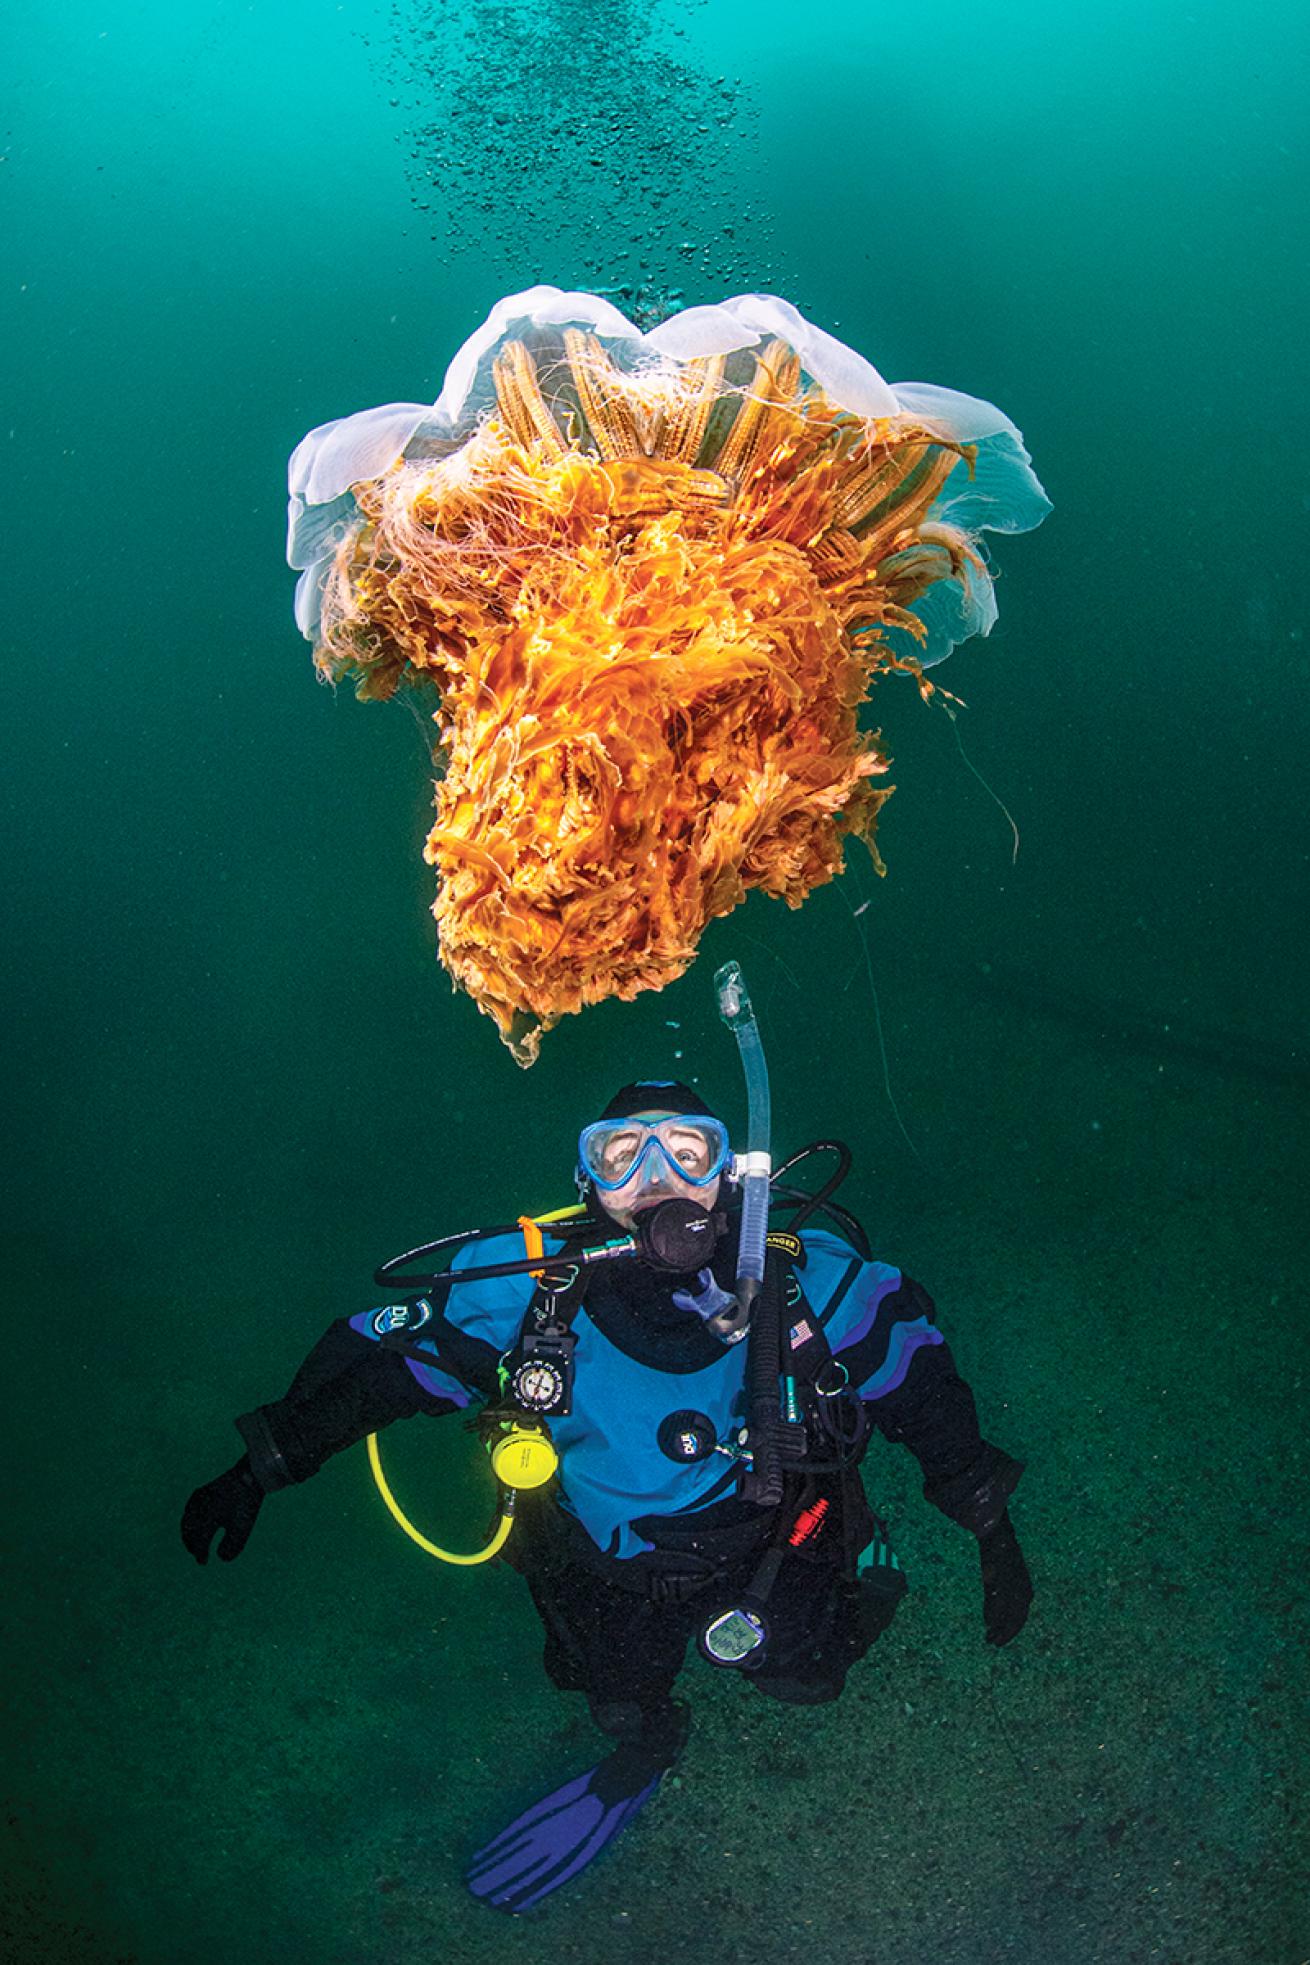 Drysuit diver watches a jellyfish